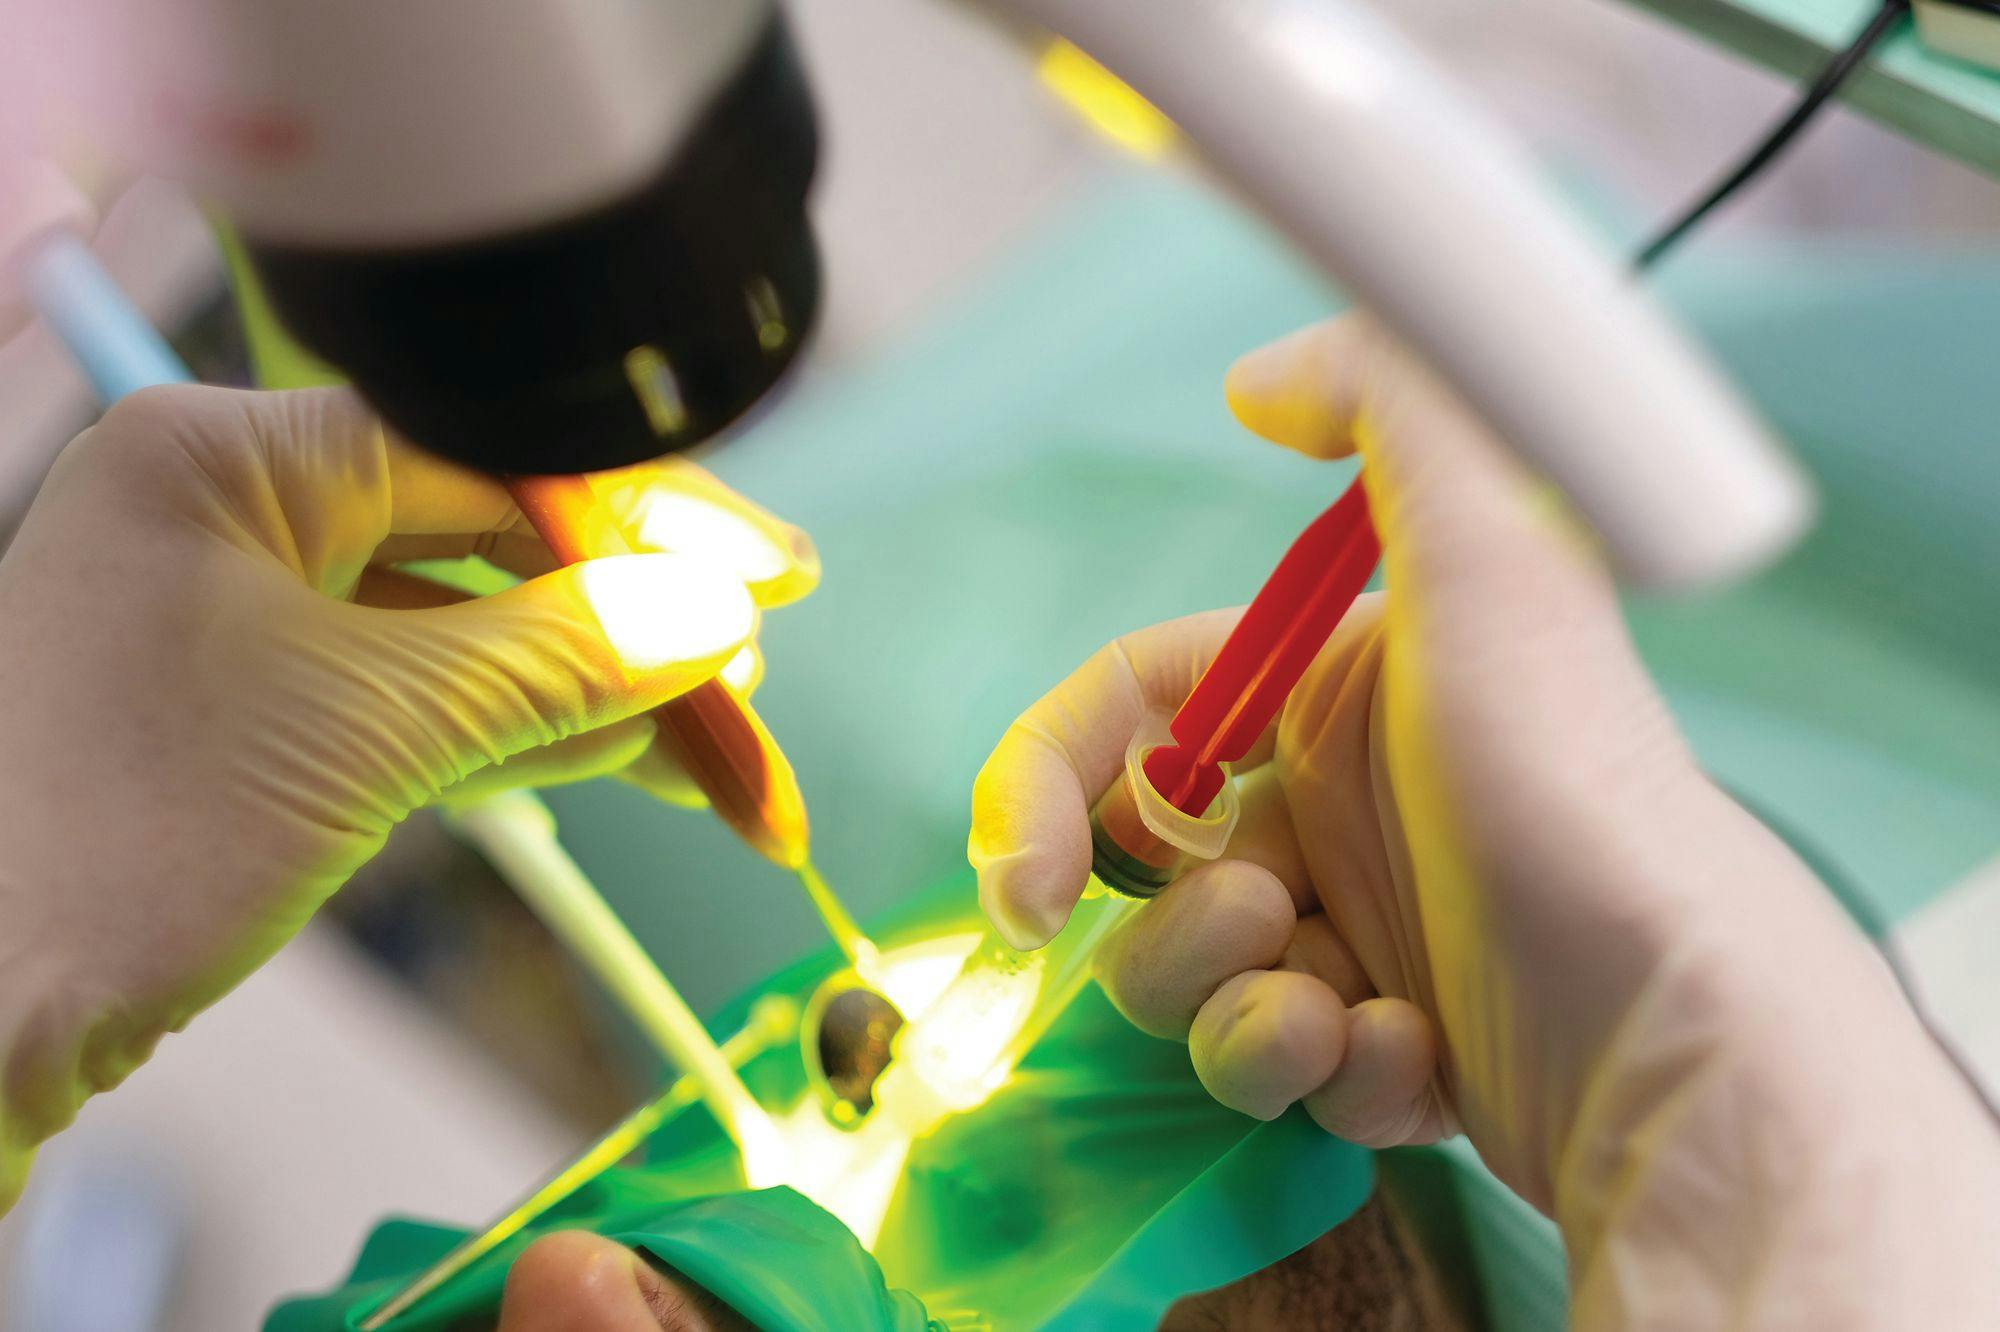 Making Things Easier With Endodontic Accessories. Image: © Anna Jurkovska - stock.adobe.com